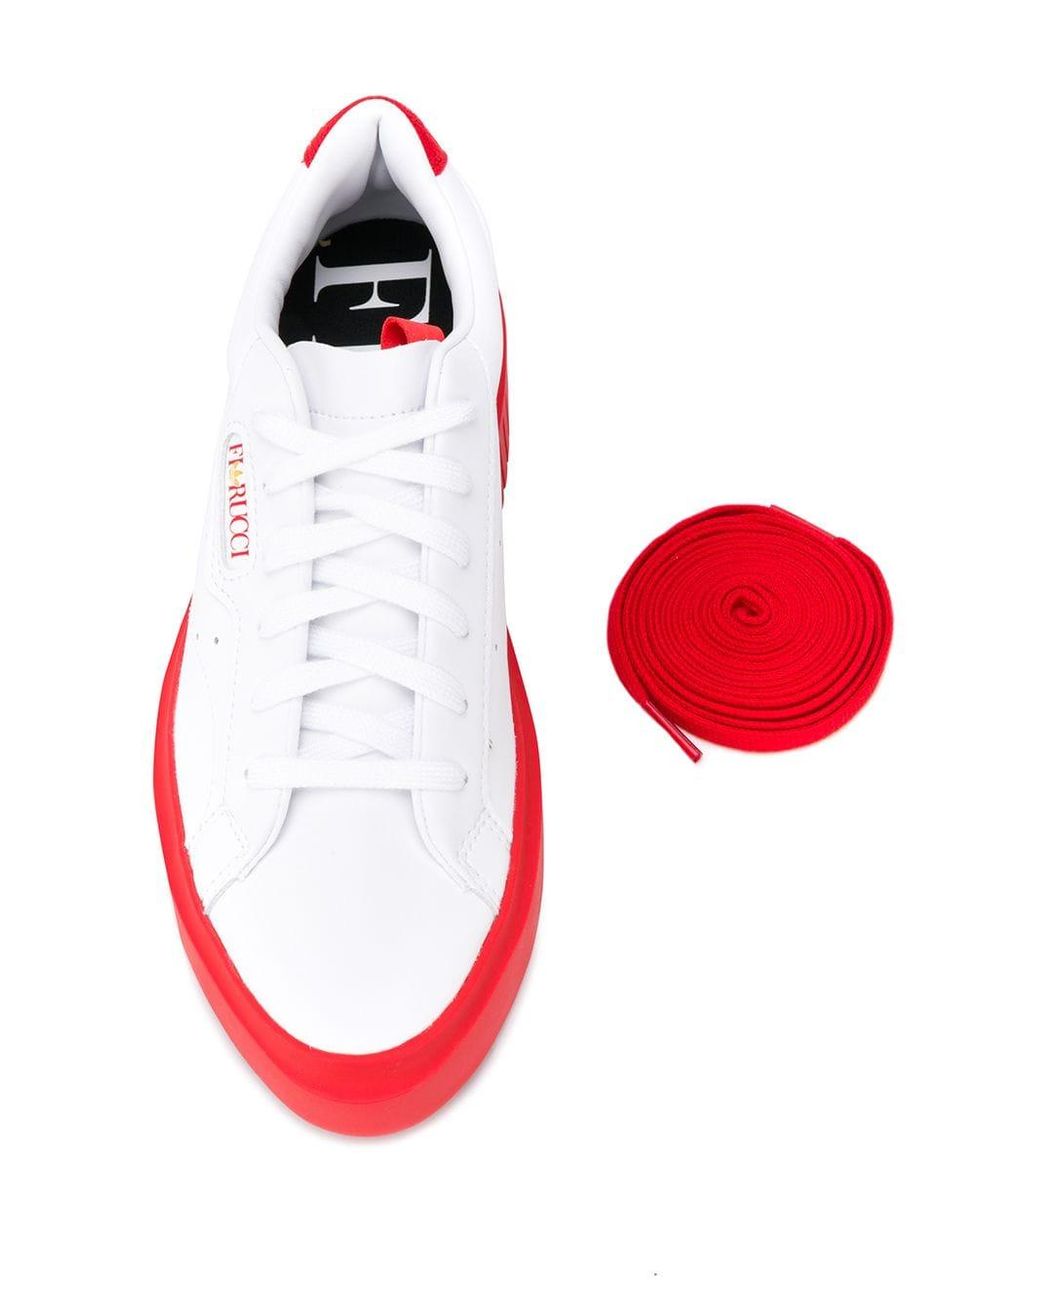 adidas Fiorucci Sneakers in White | Lyst